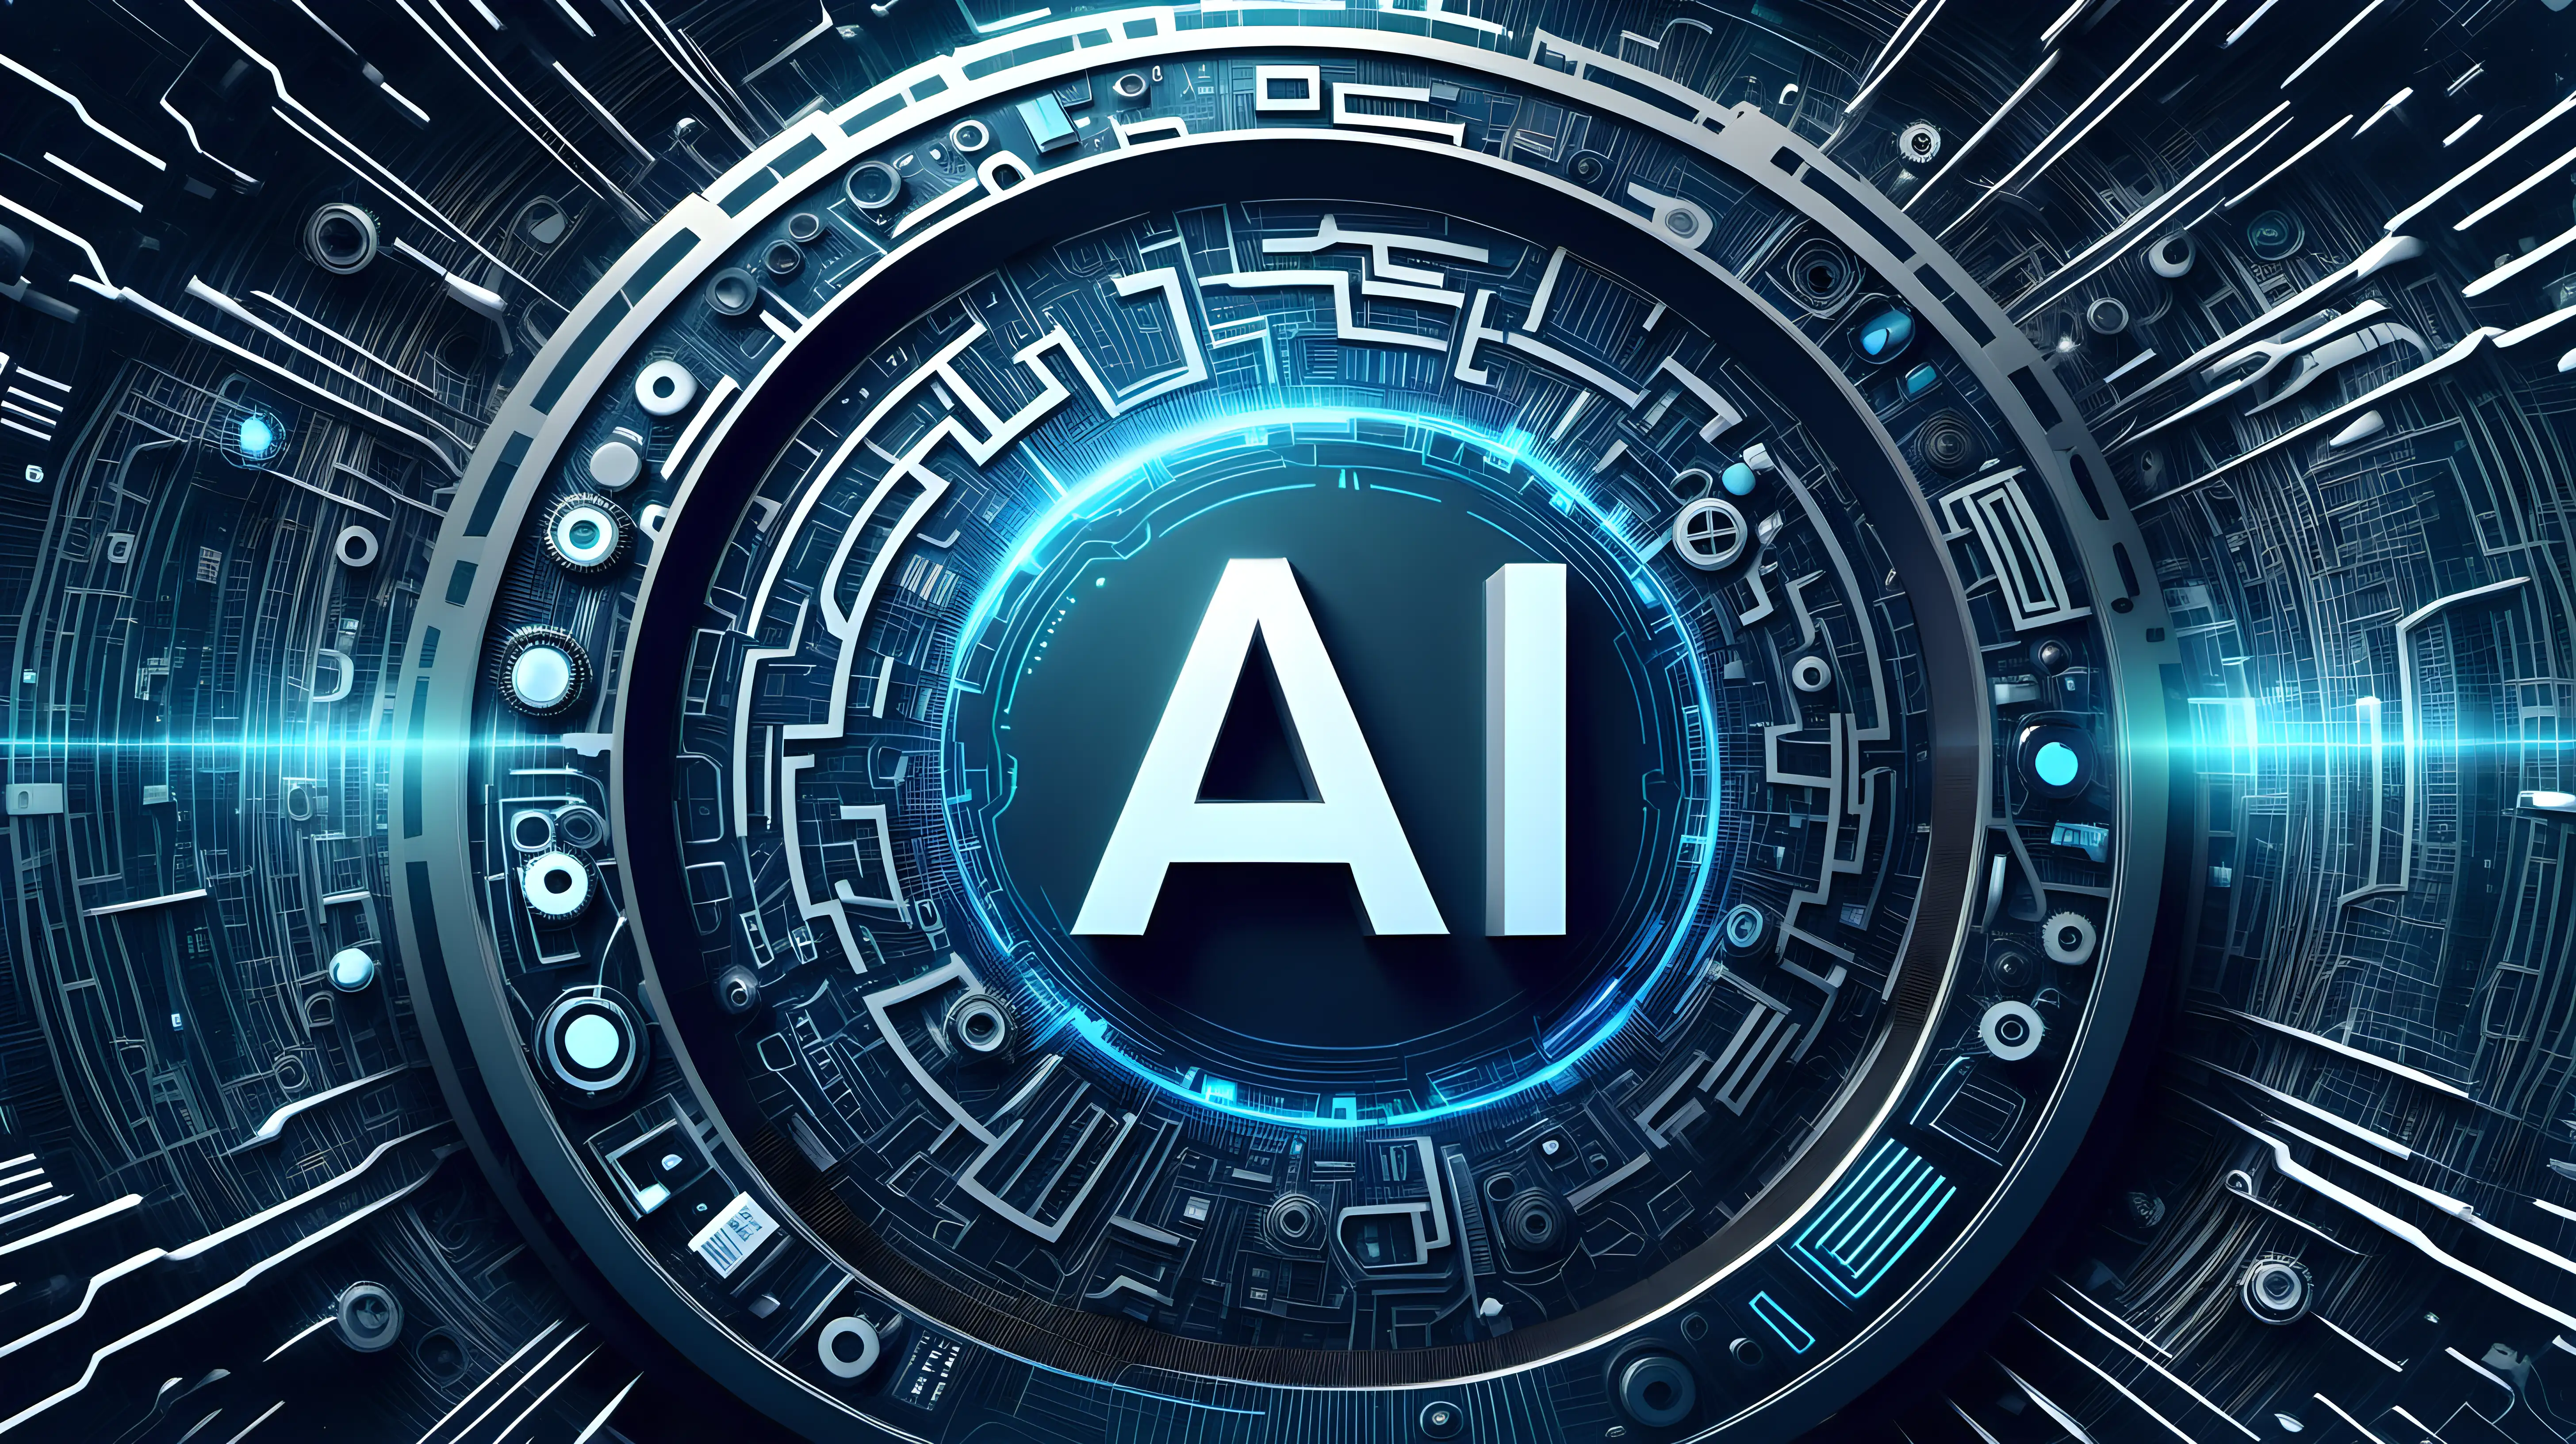 An image that captures the futuristic essence of AI, with the "AI" text prominently displayed in the center, surrounded by abstract technological patterns and digital elements.